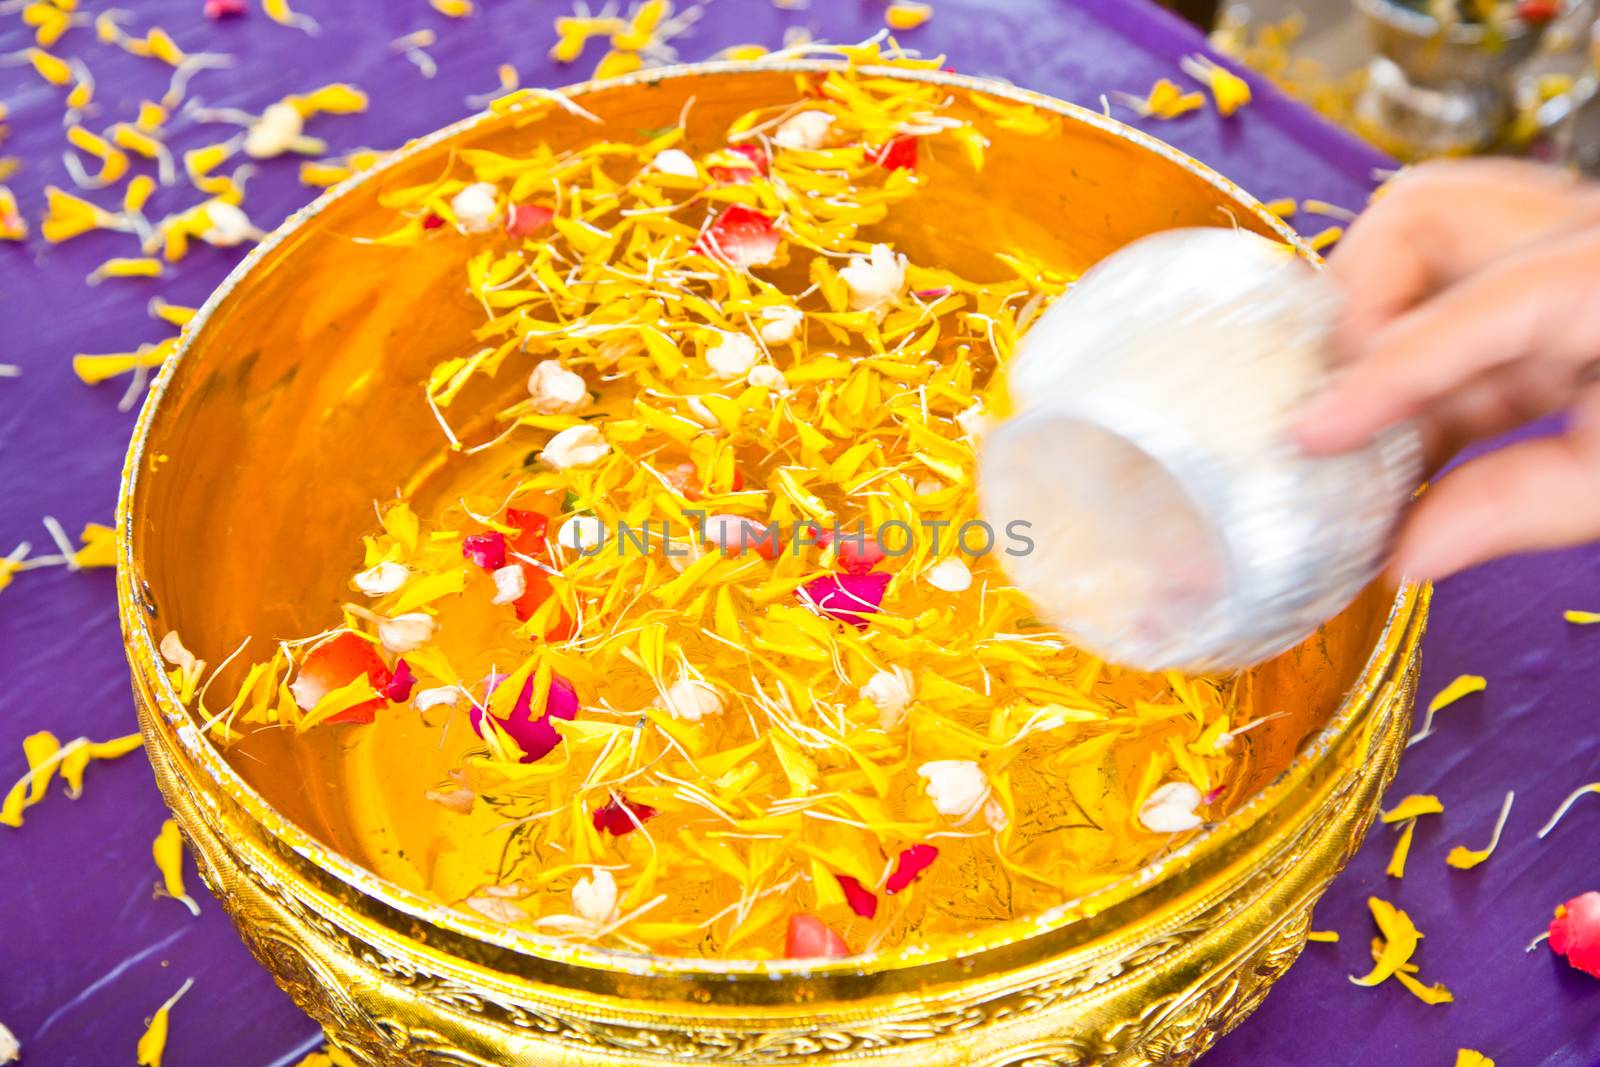 Water in bowl mixed with perfume and  flowers for Songkran festi by tisskananat